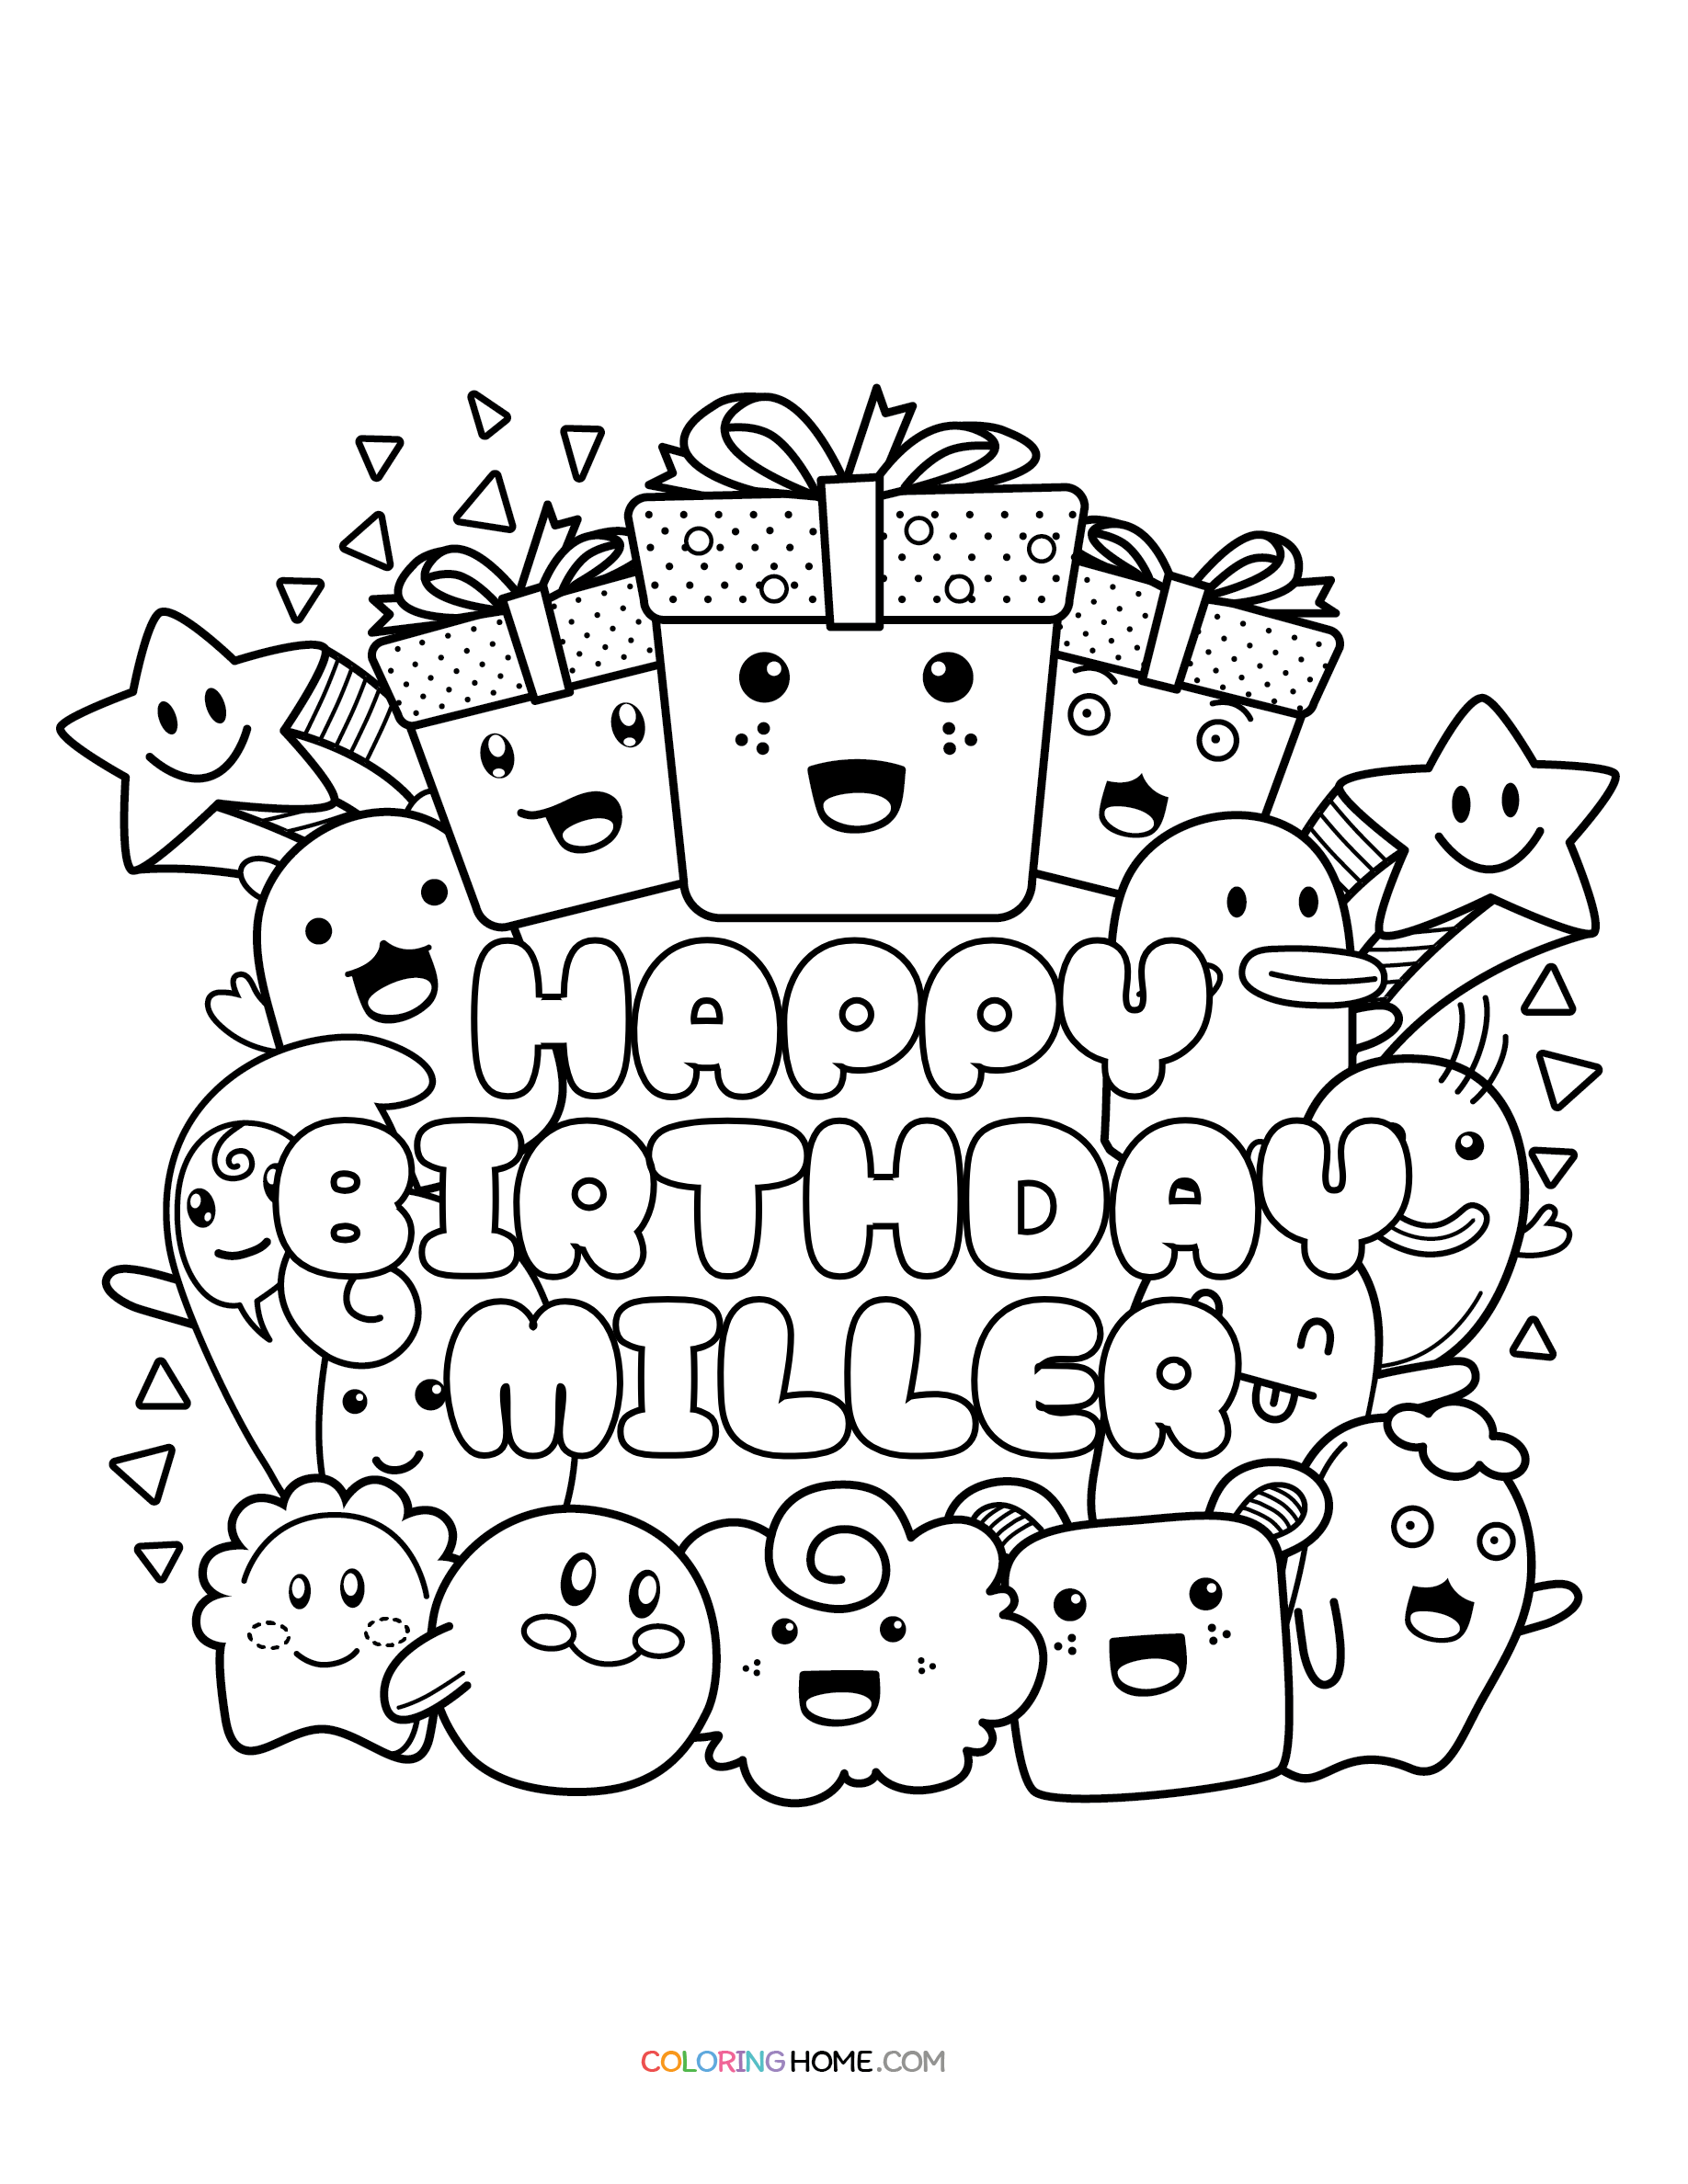 Happy Birthday Miller coloring page